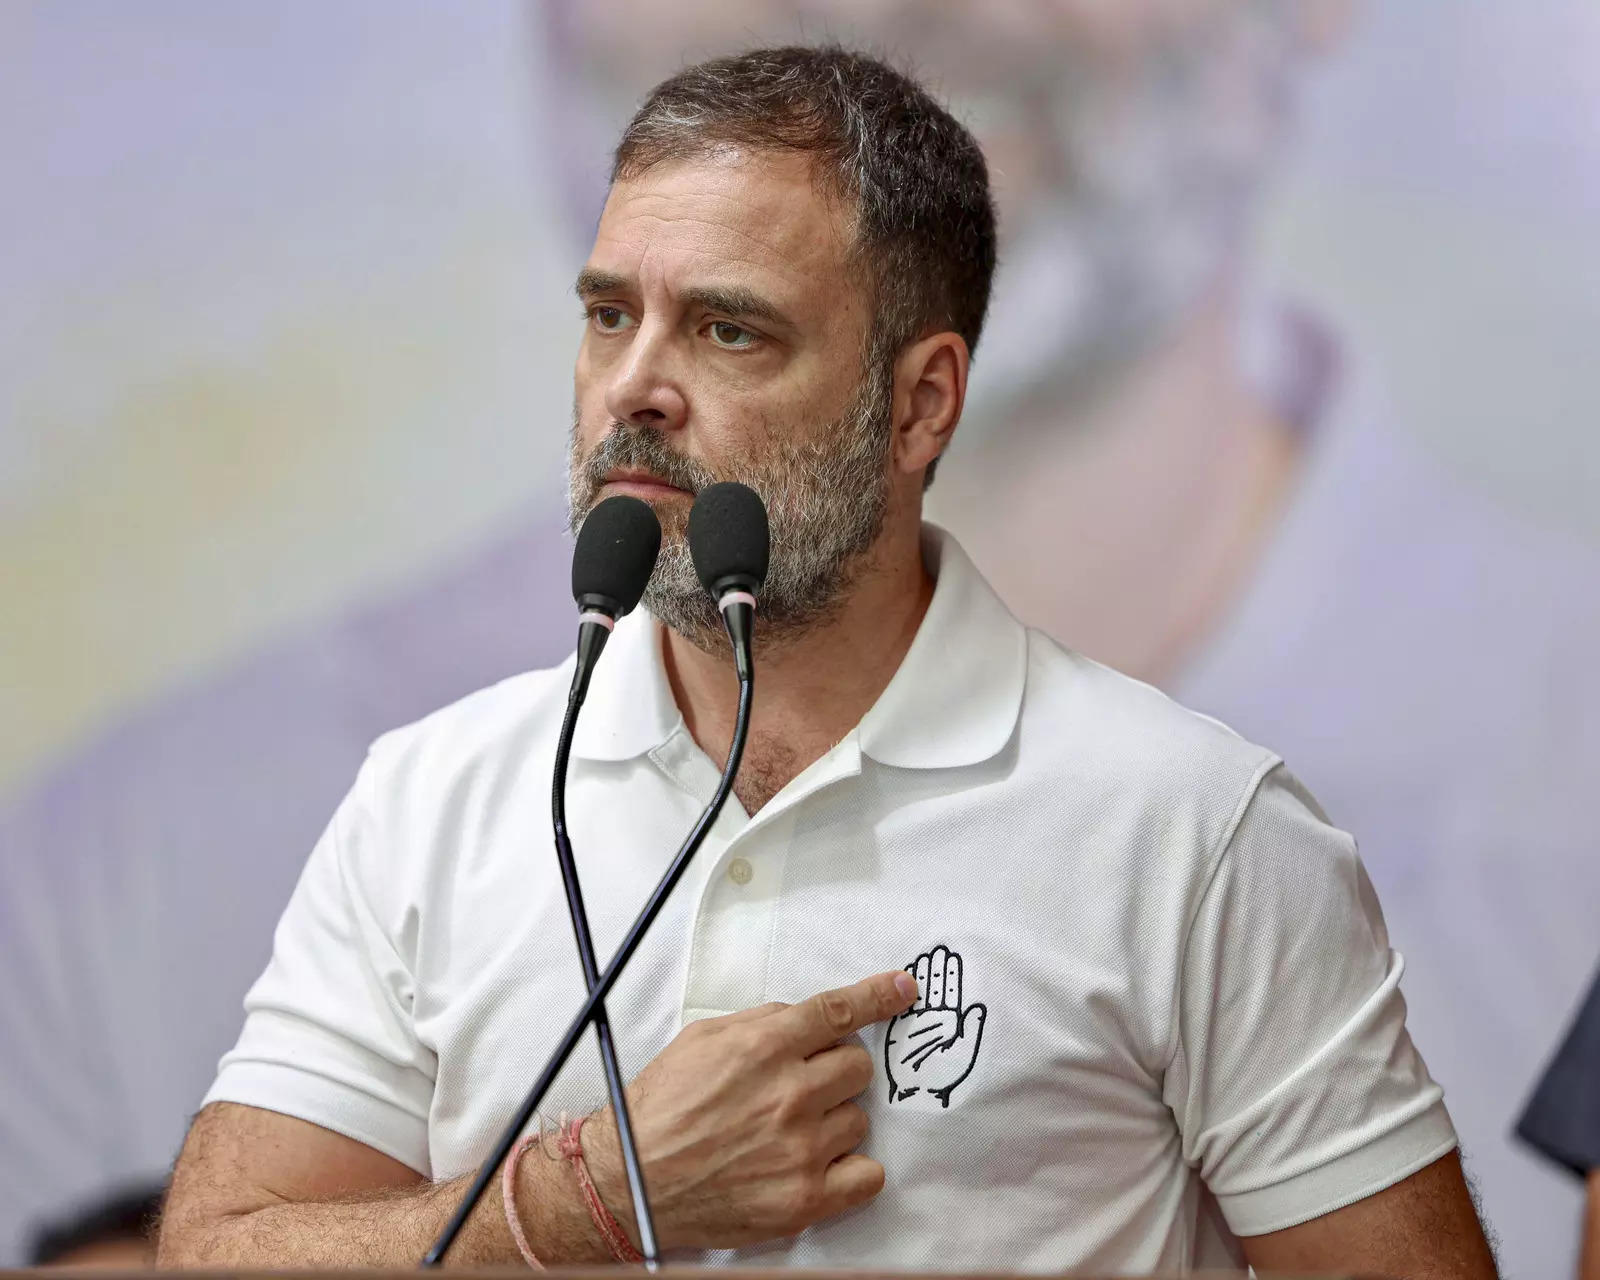 Doda encounter: Govt must take responsibility for repeated security lapses, says LoP Rahul Gandhi 